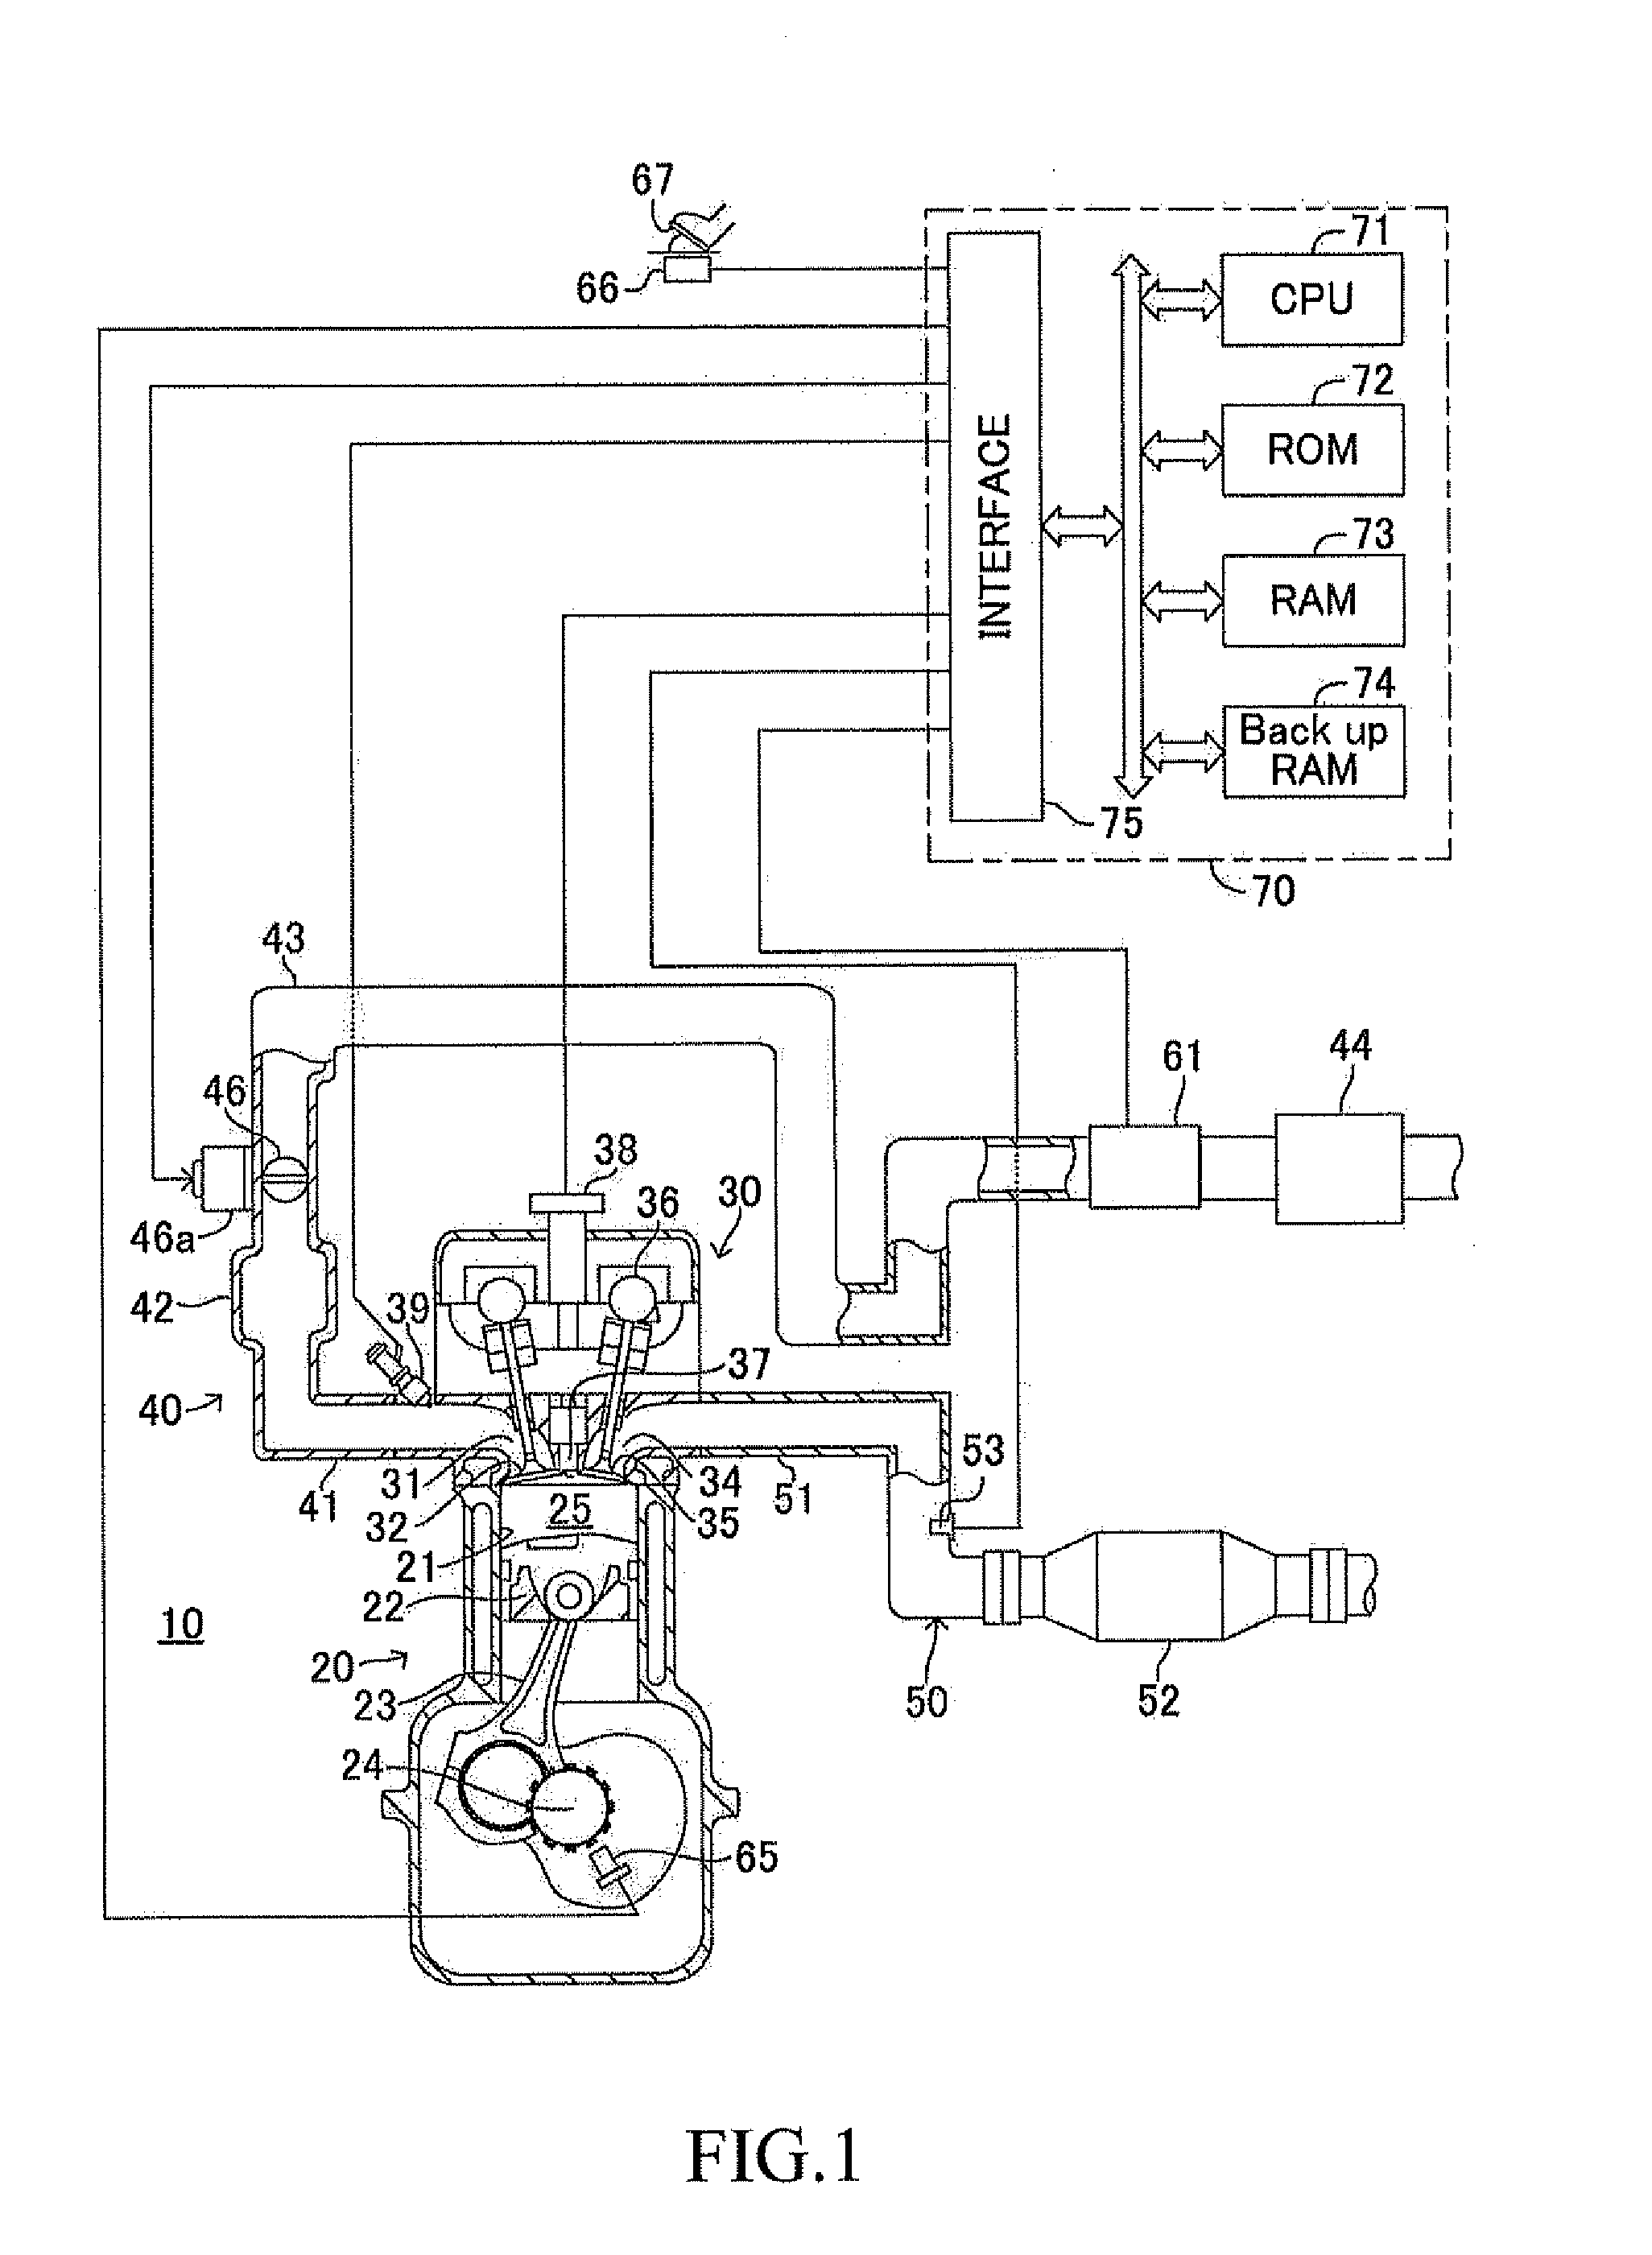 Air-fuel ratio control apparatus for an internal combustion engine